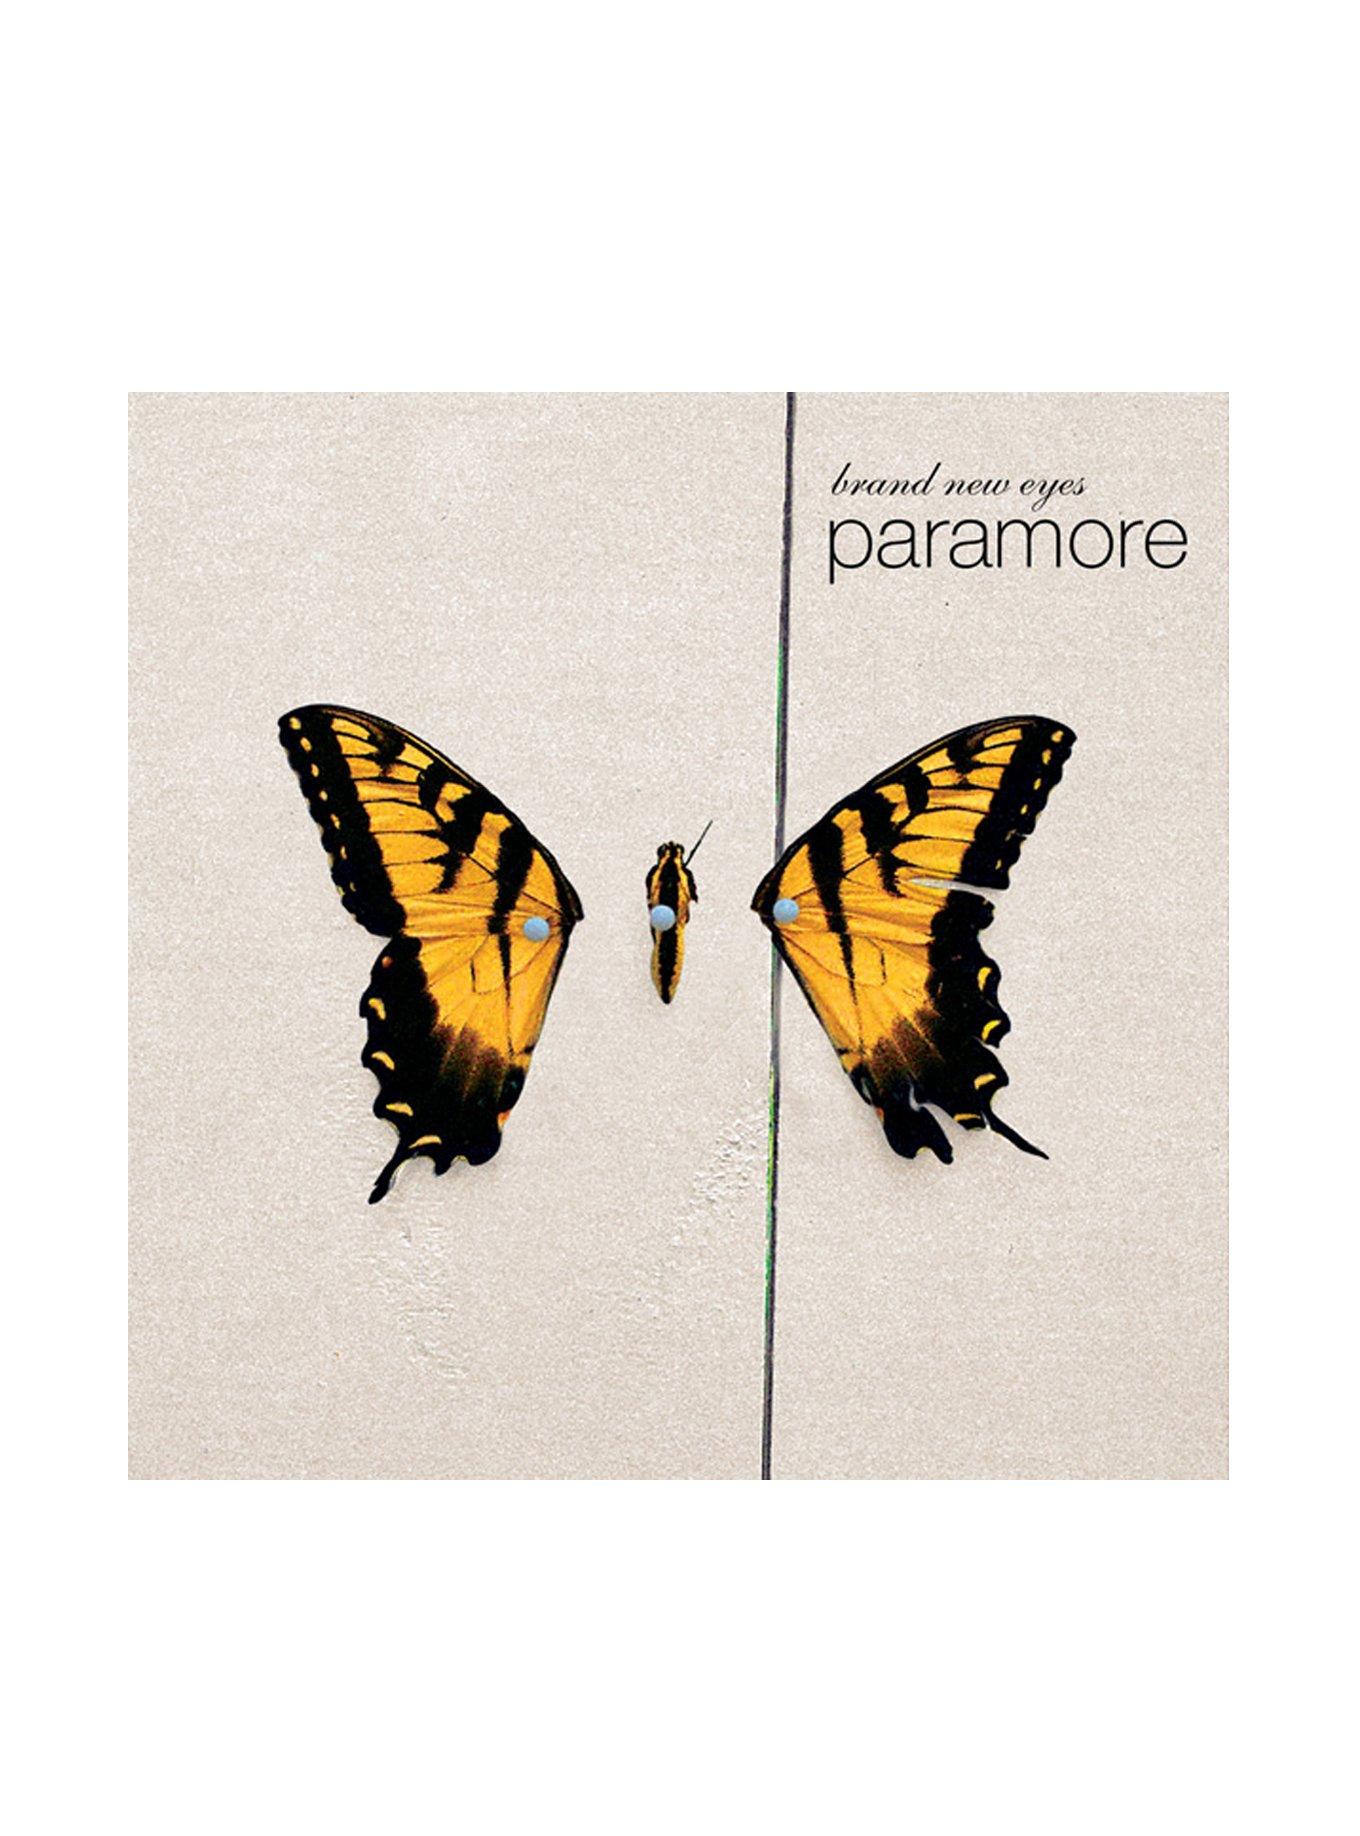 Paramore - Brand New Eyes, Colored Vinyl